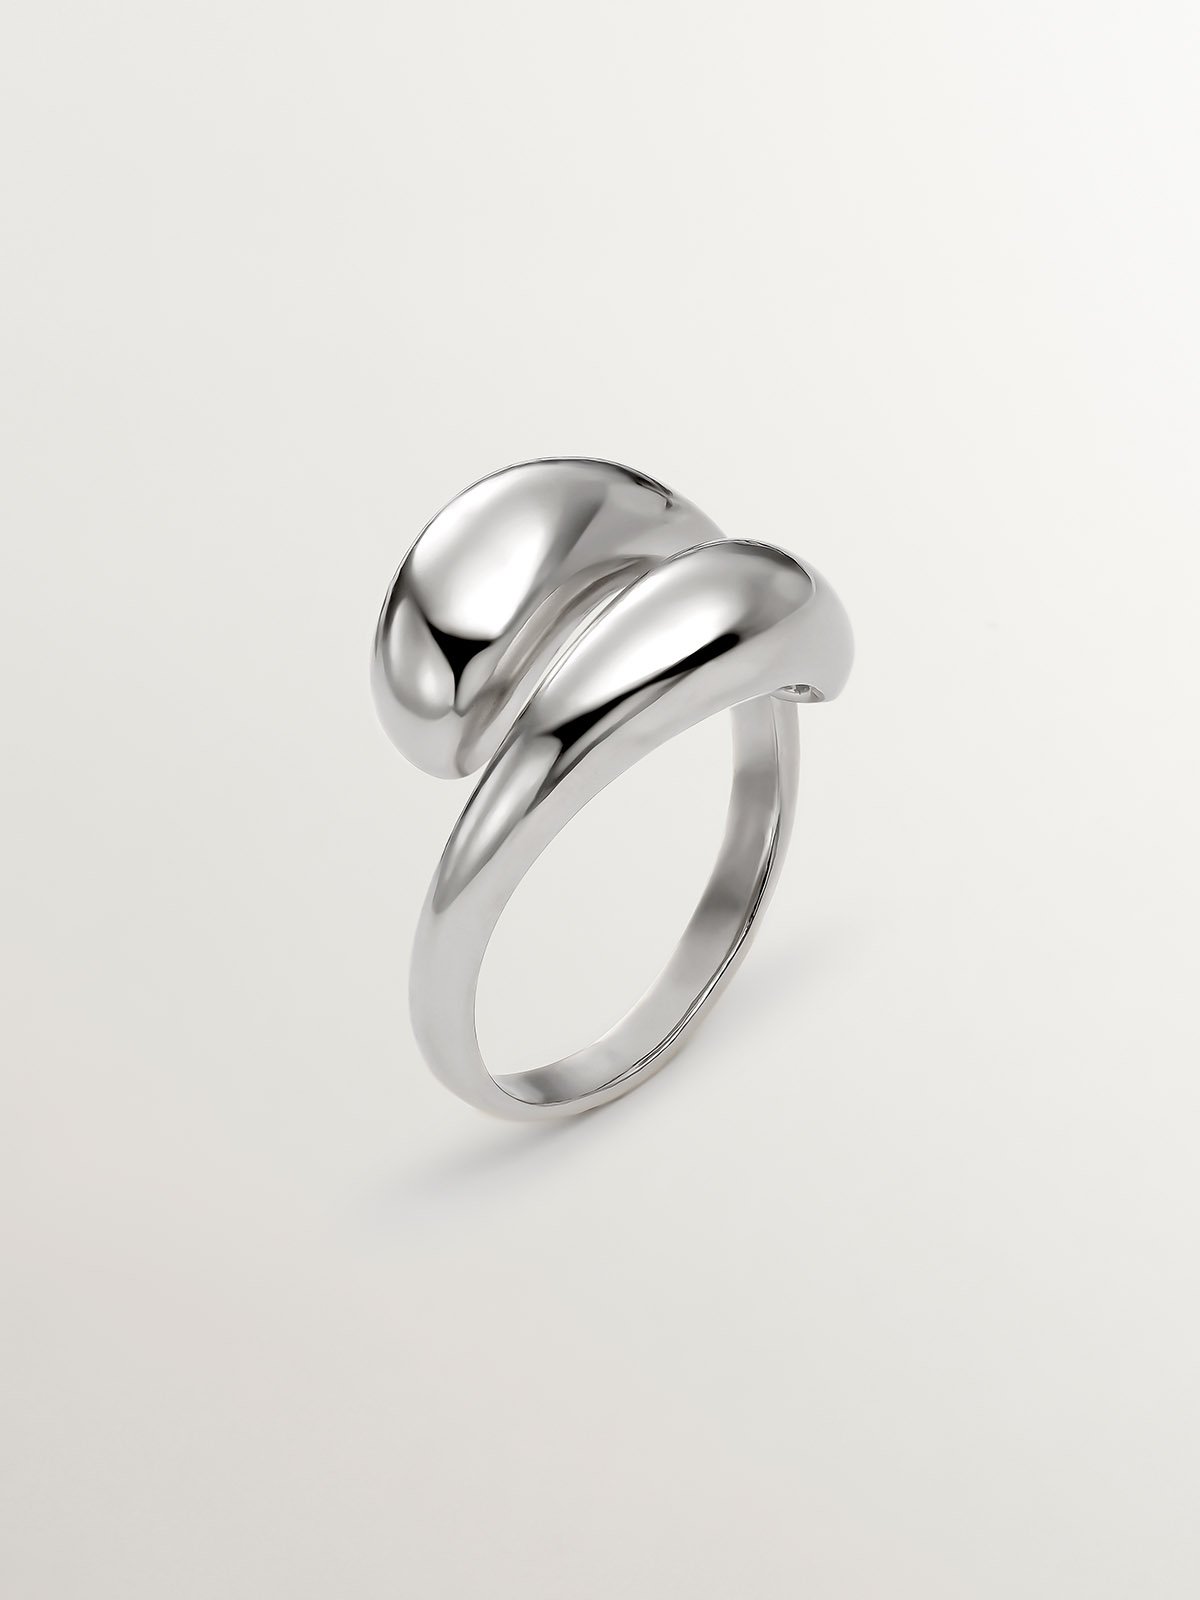 You and Me ring made of 925 silver with a domed spiral shape.